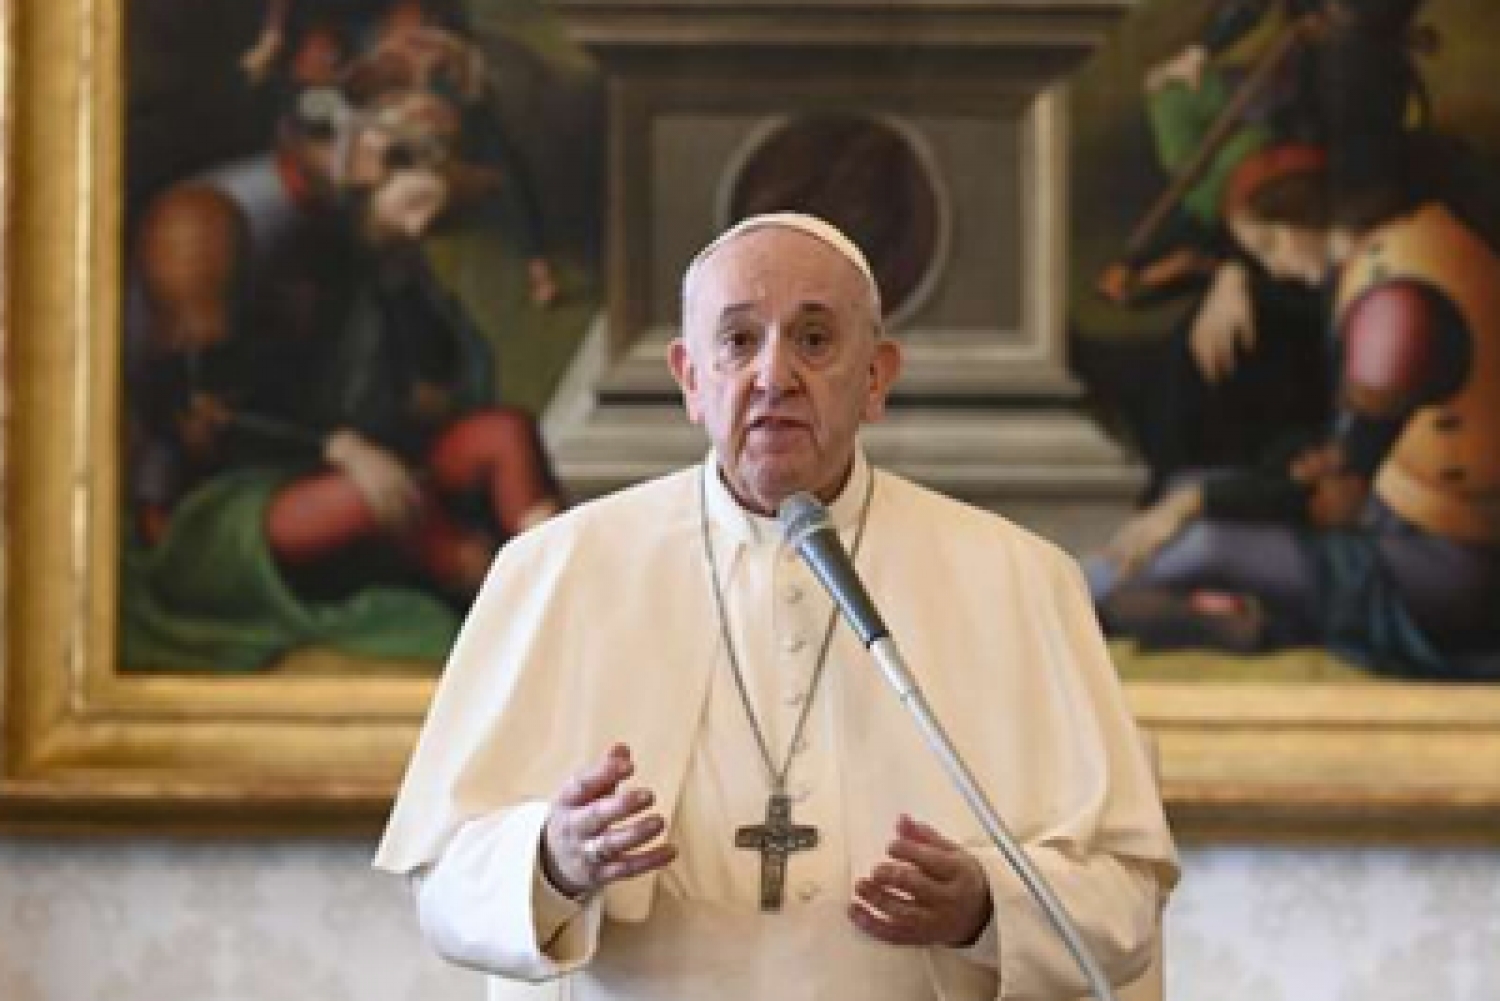 &quot;Justice is truly just when it makes people happy,&quot; says the Pope